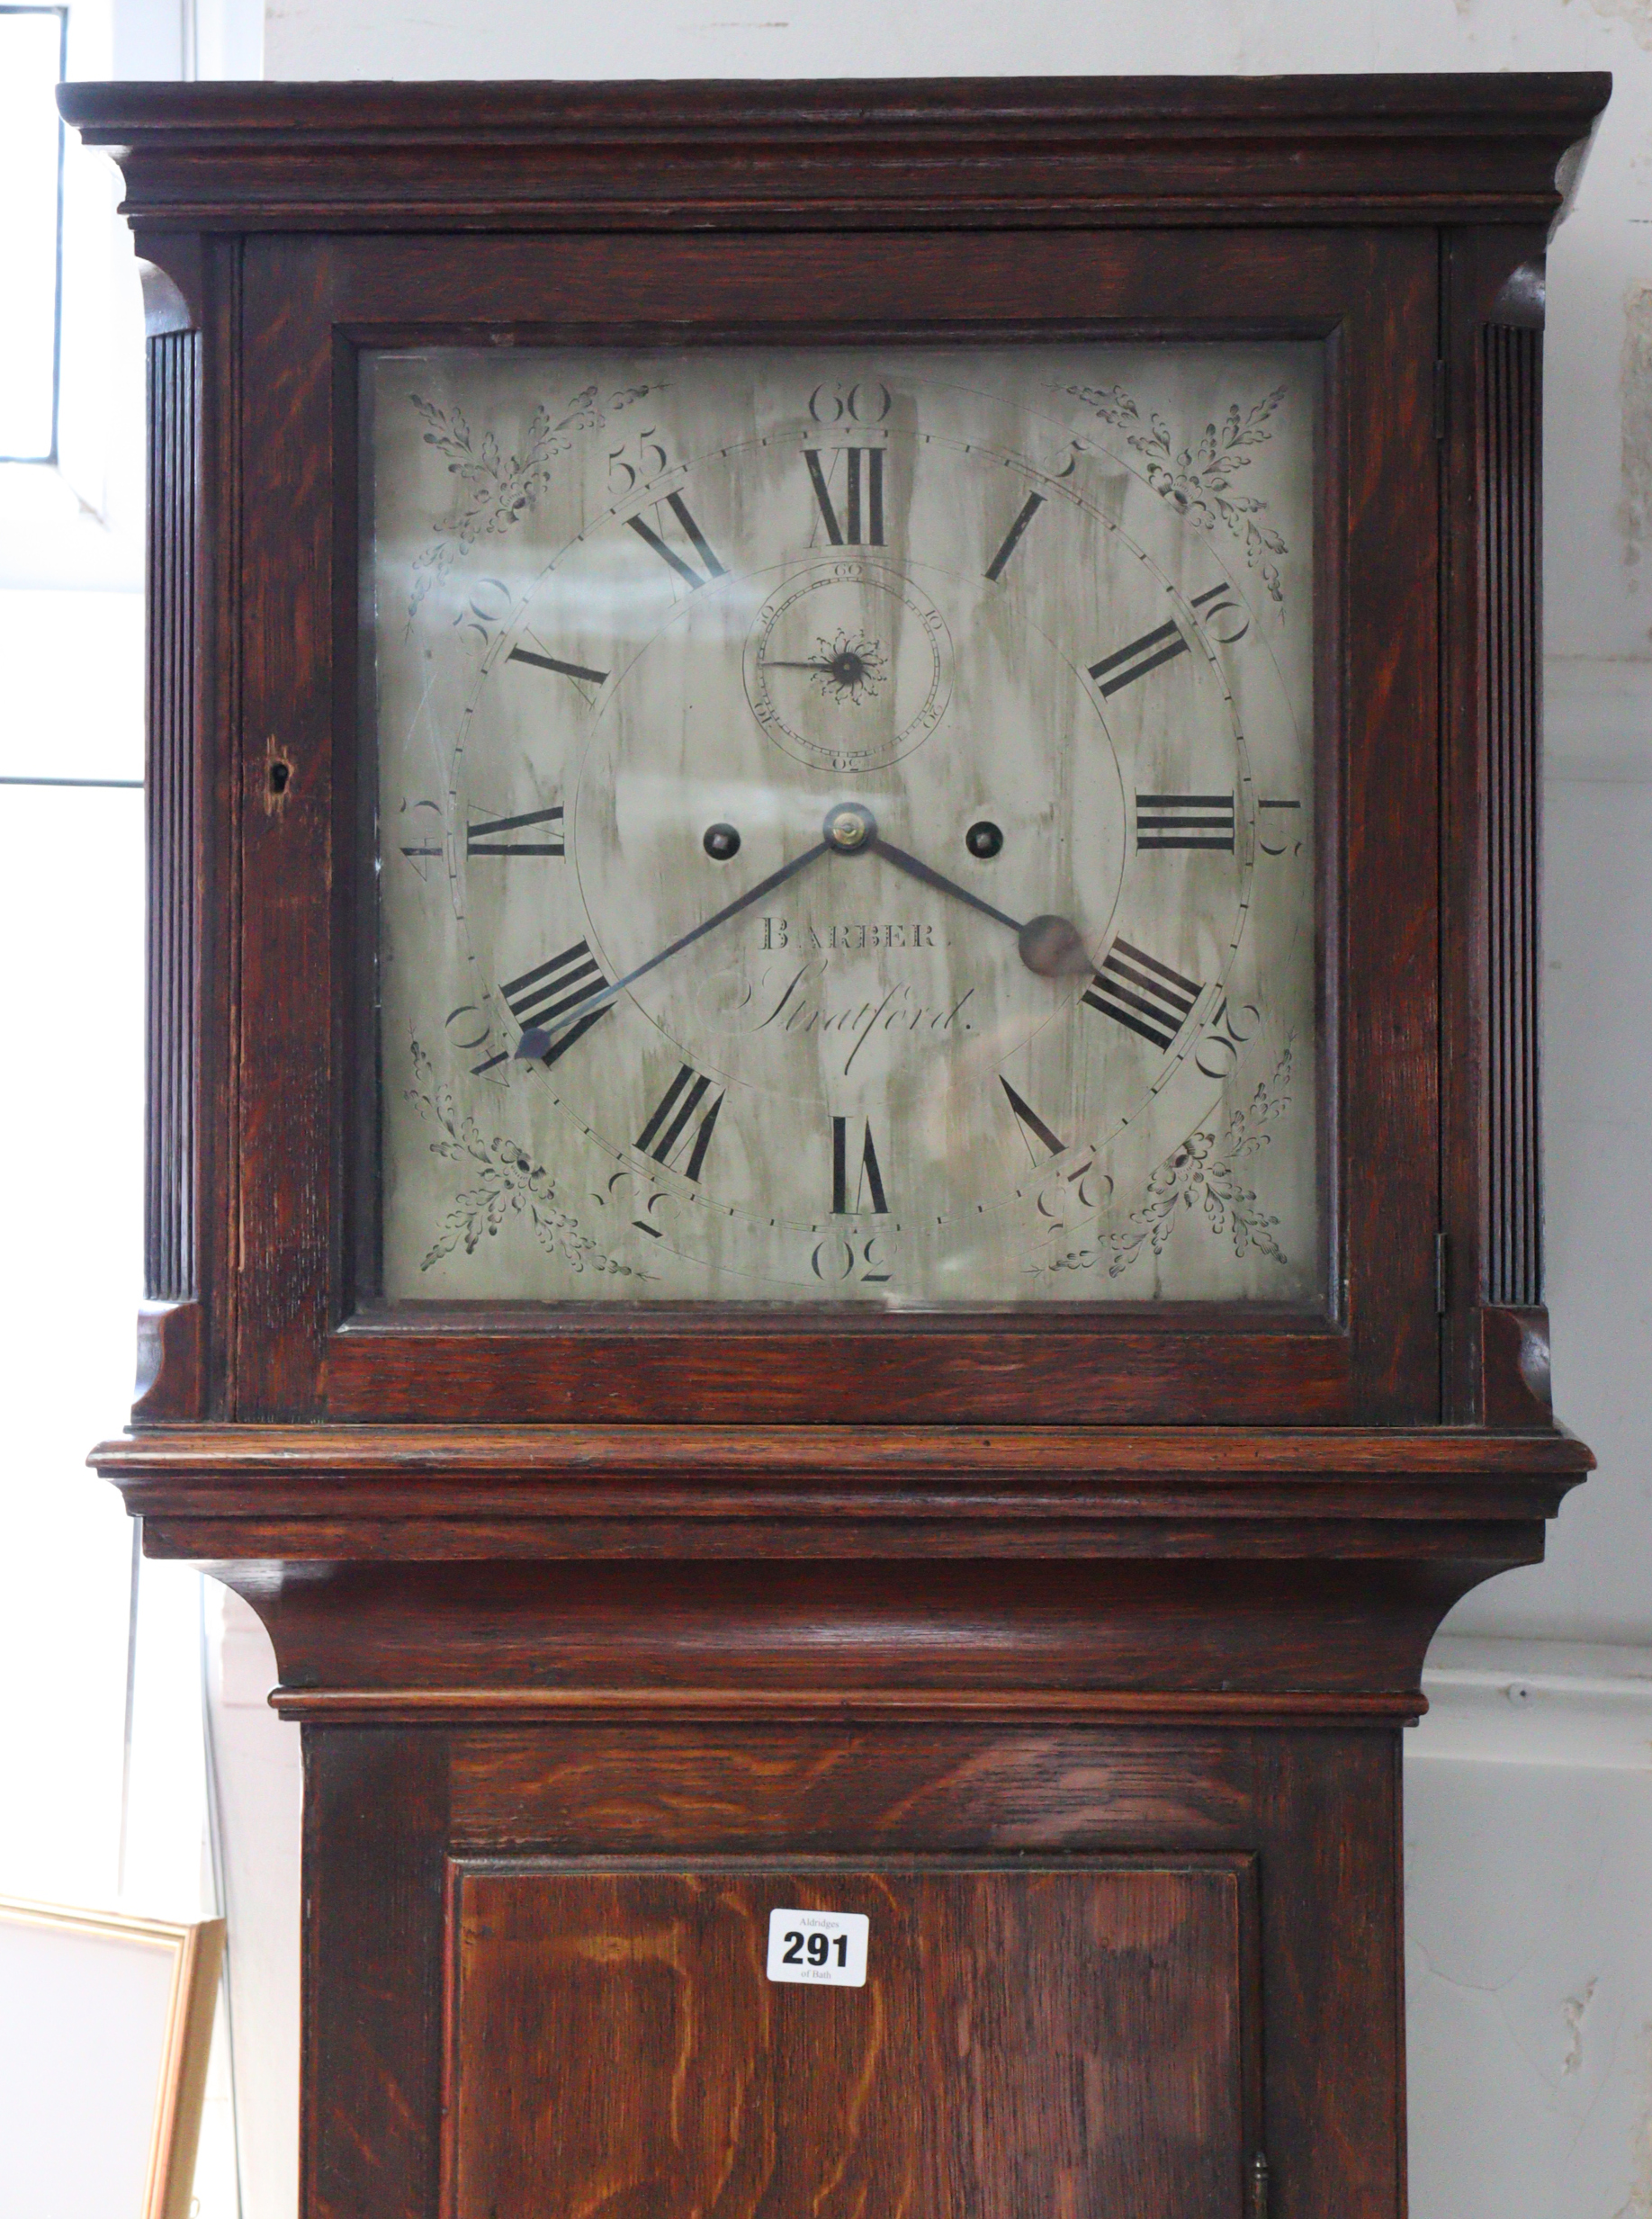 A late 18th century longcase clock with 12” engraved silvered dial signed “BARBER, Stratford”, 8-day